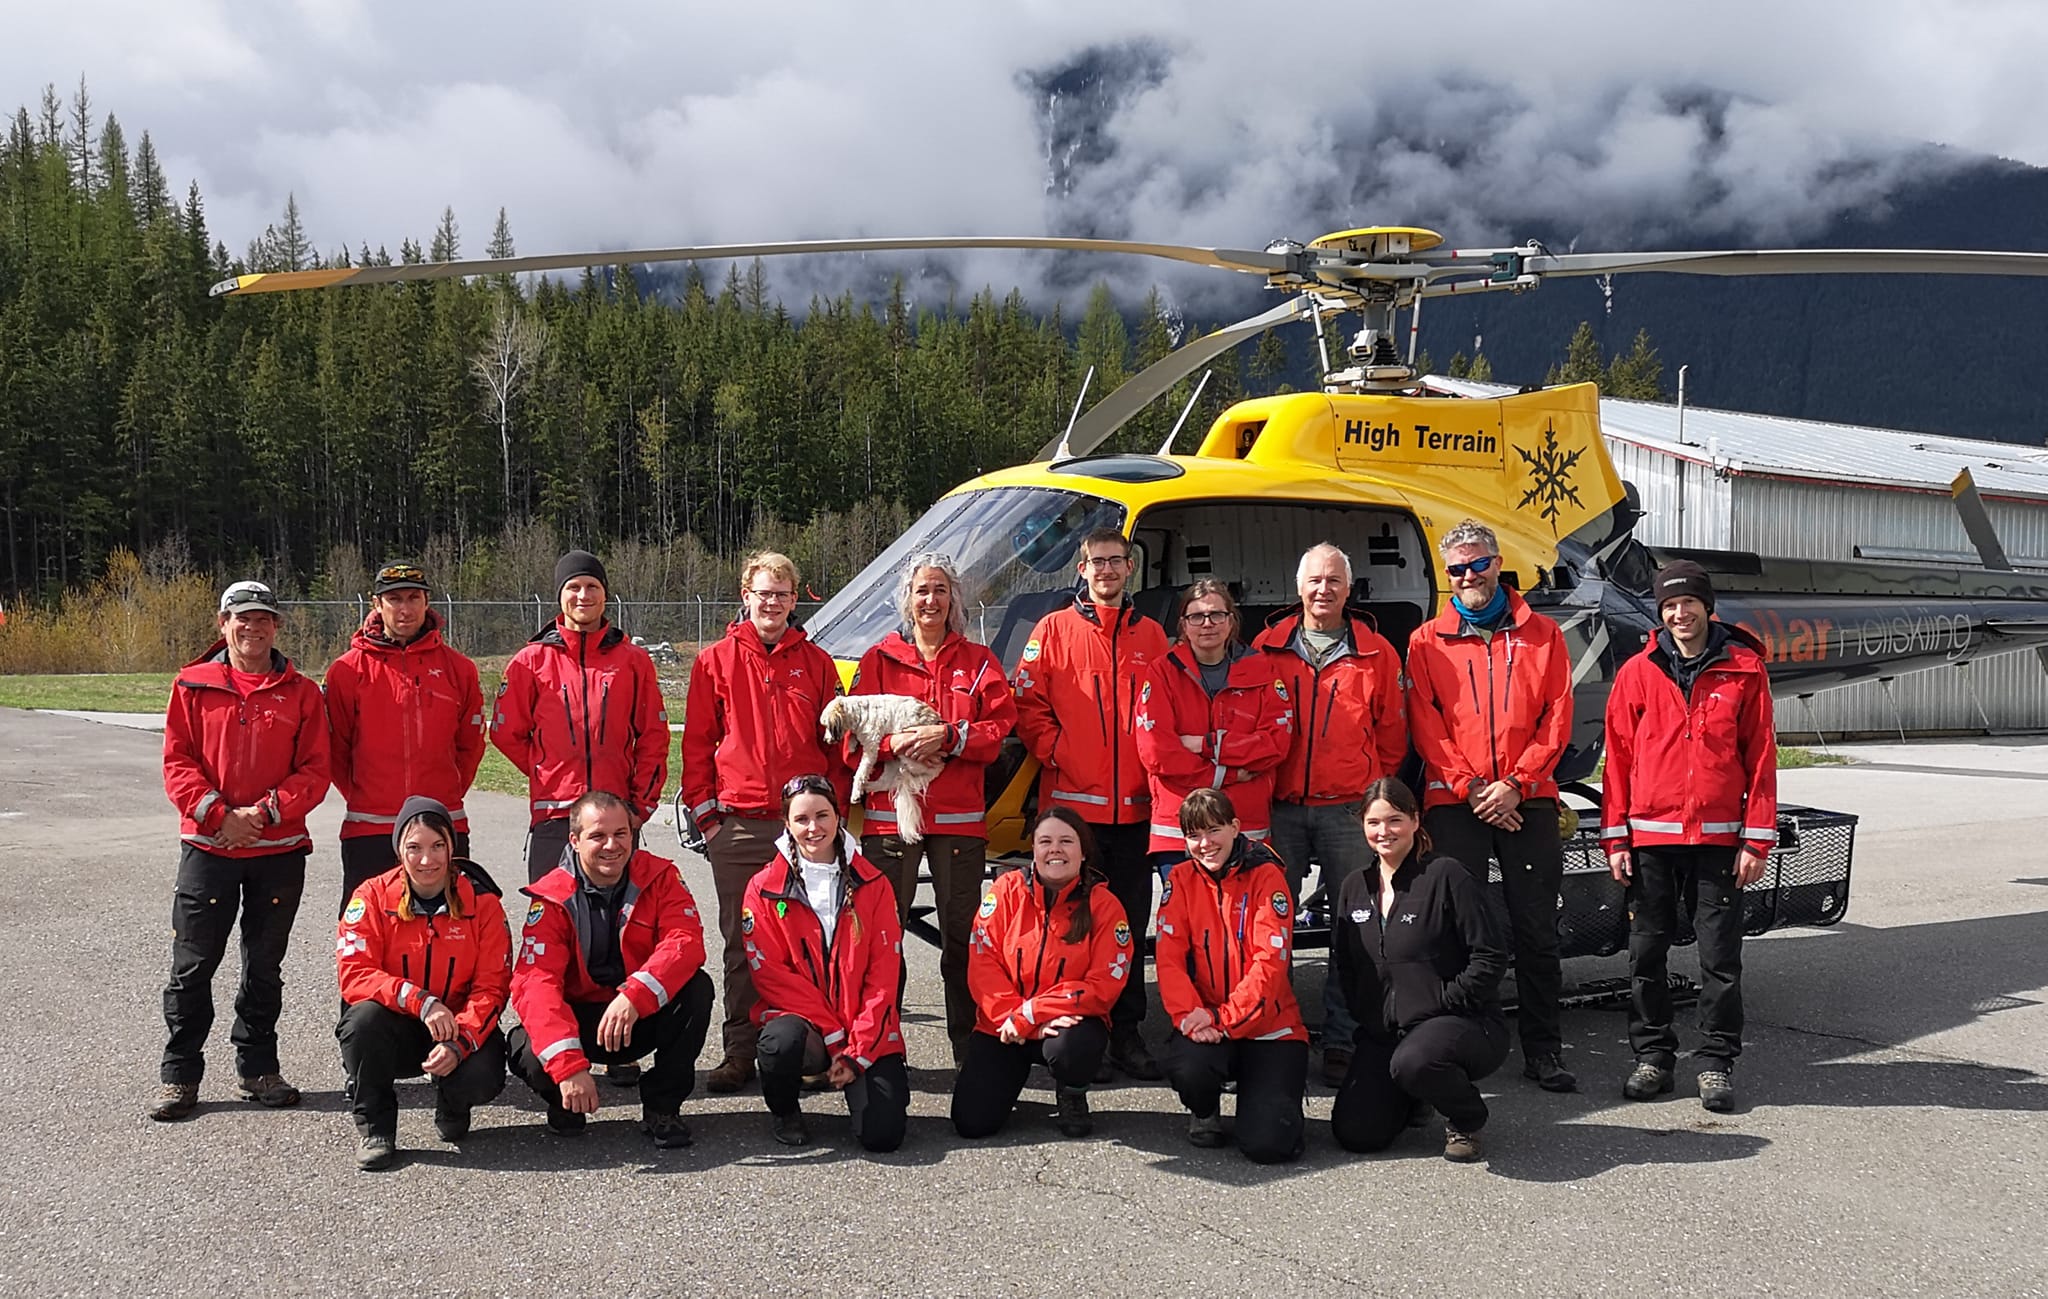 Team photo in front of a helictopter